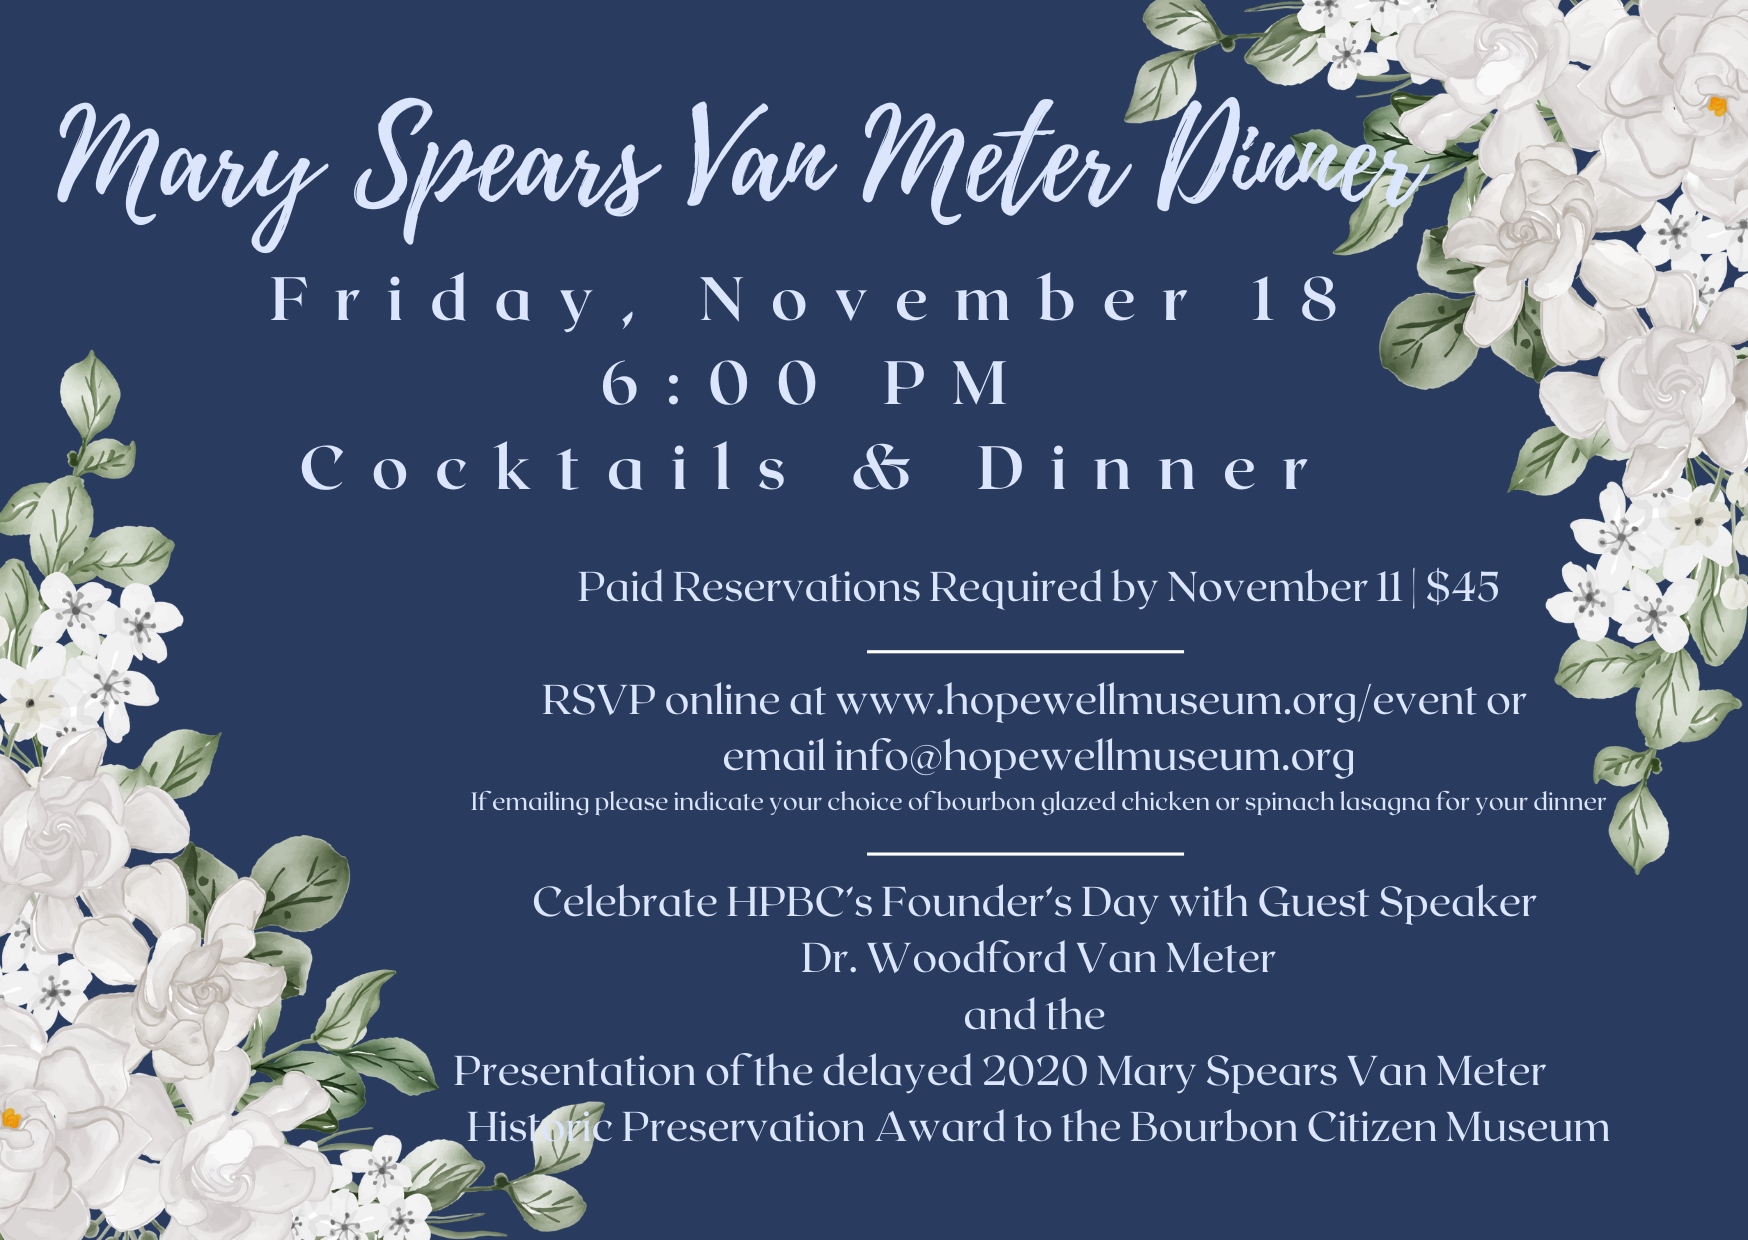 Mary Spears Van Meter Dinner - Friday, November 18, 6:00 p.m., Cocktails & Dinner, Paid reservations required by Novmeber 11, $45 - RSVP online at www.hopewellmuseum.org/event or email info@hopewellmuseum.org. If emailing please indicate your choice of bourbon glazed chicken or spinach lasagna for your dinner. Celebrate HPBC's Founder's Day with guest speaker Dr. Woodford Van Meter and the presentation of the delayed 202 Mary Spears Van Meter Preservation Award to the Bourbon Citizen Museum